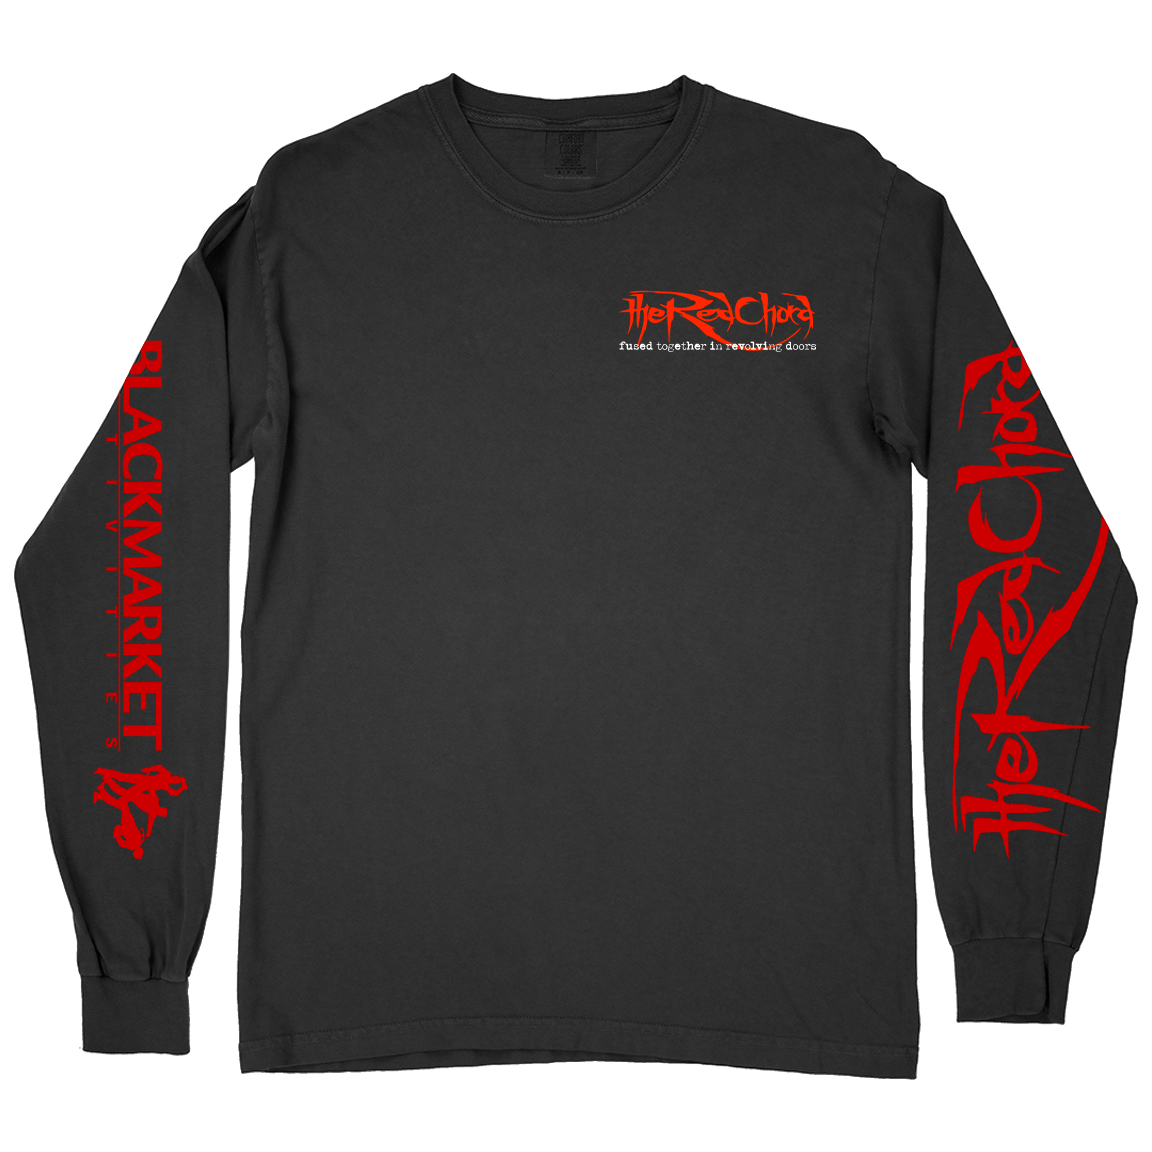 The Red Chord "Red Hand" Black Premium Longsleeve